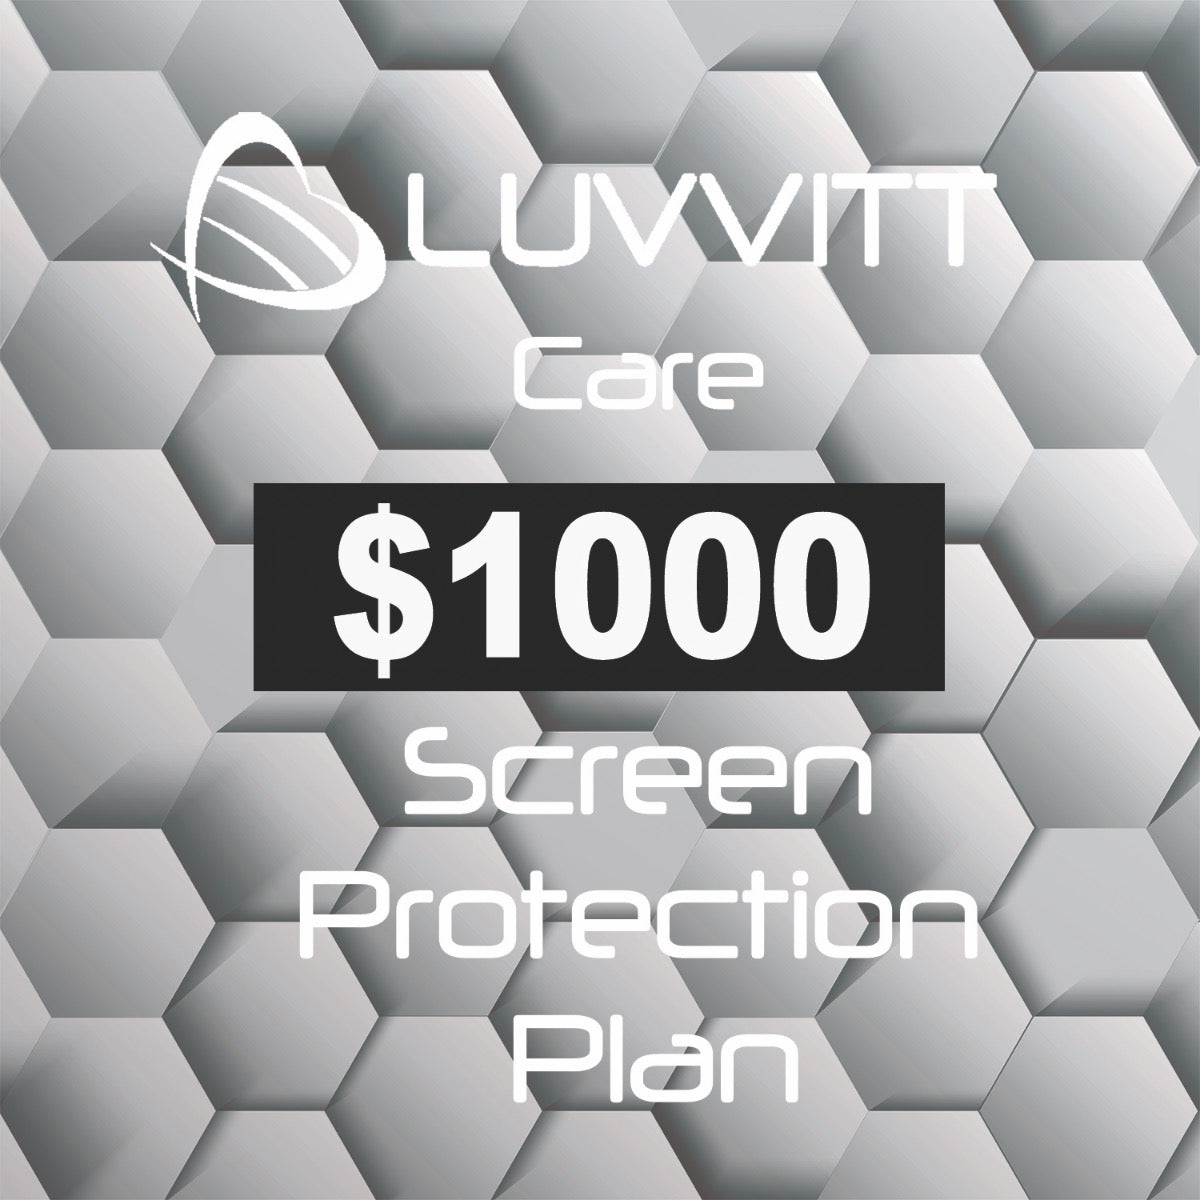 Luvvitt Care $1000 Screen Protection Coverage for all Mobile Devices